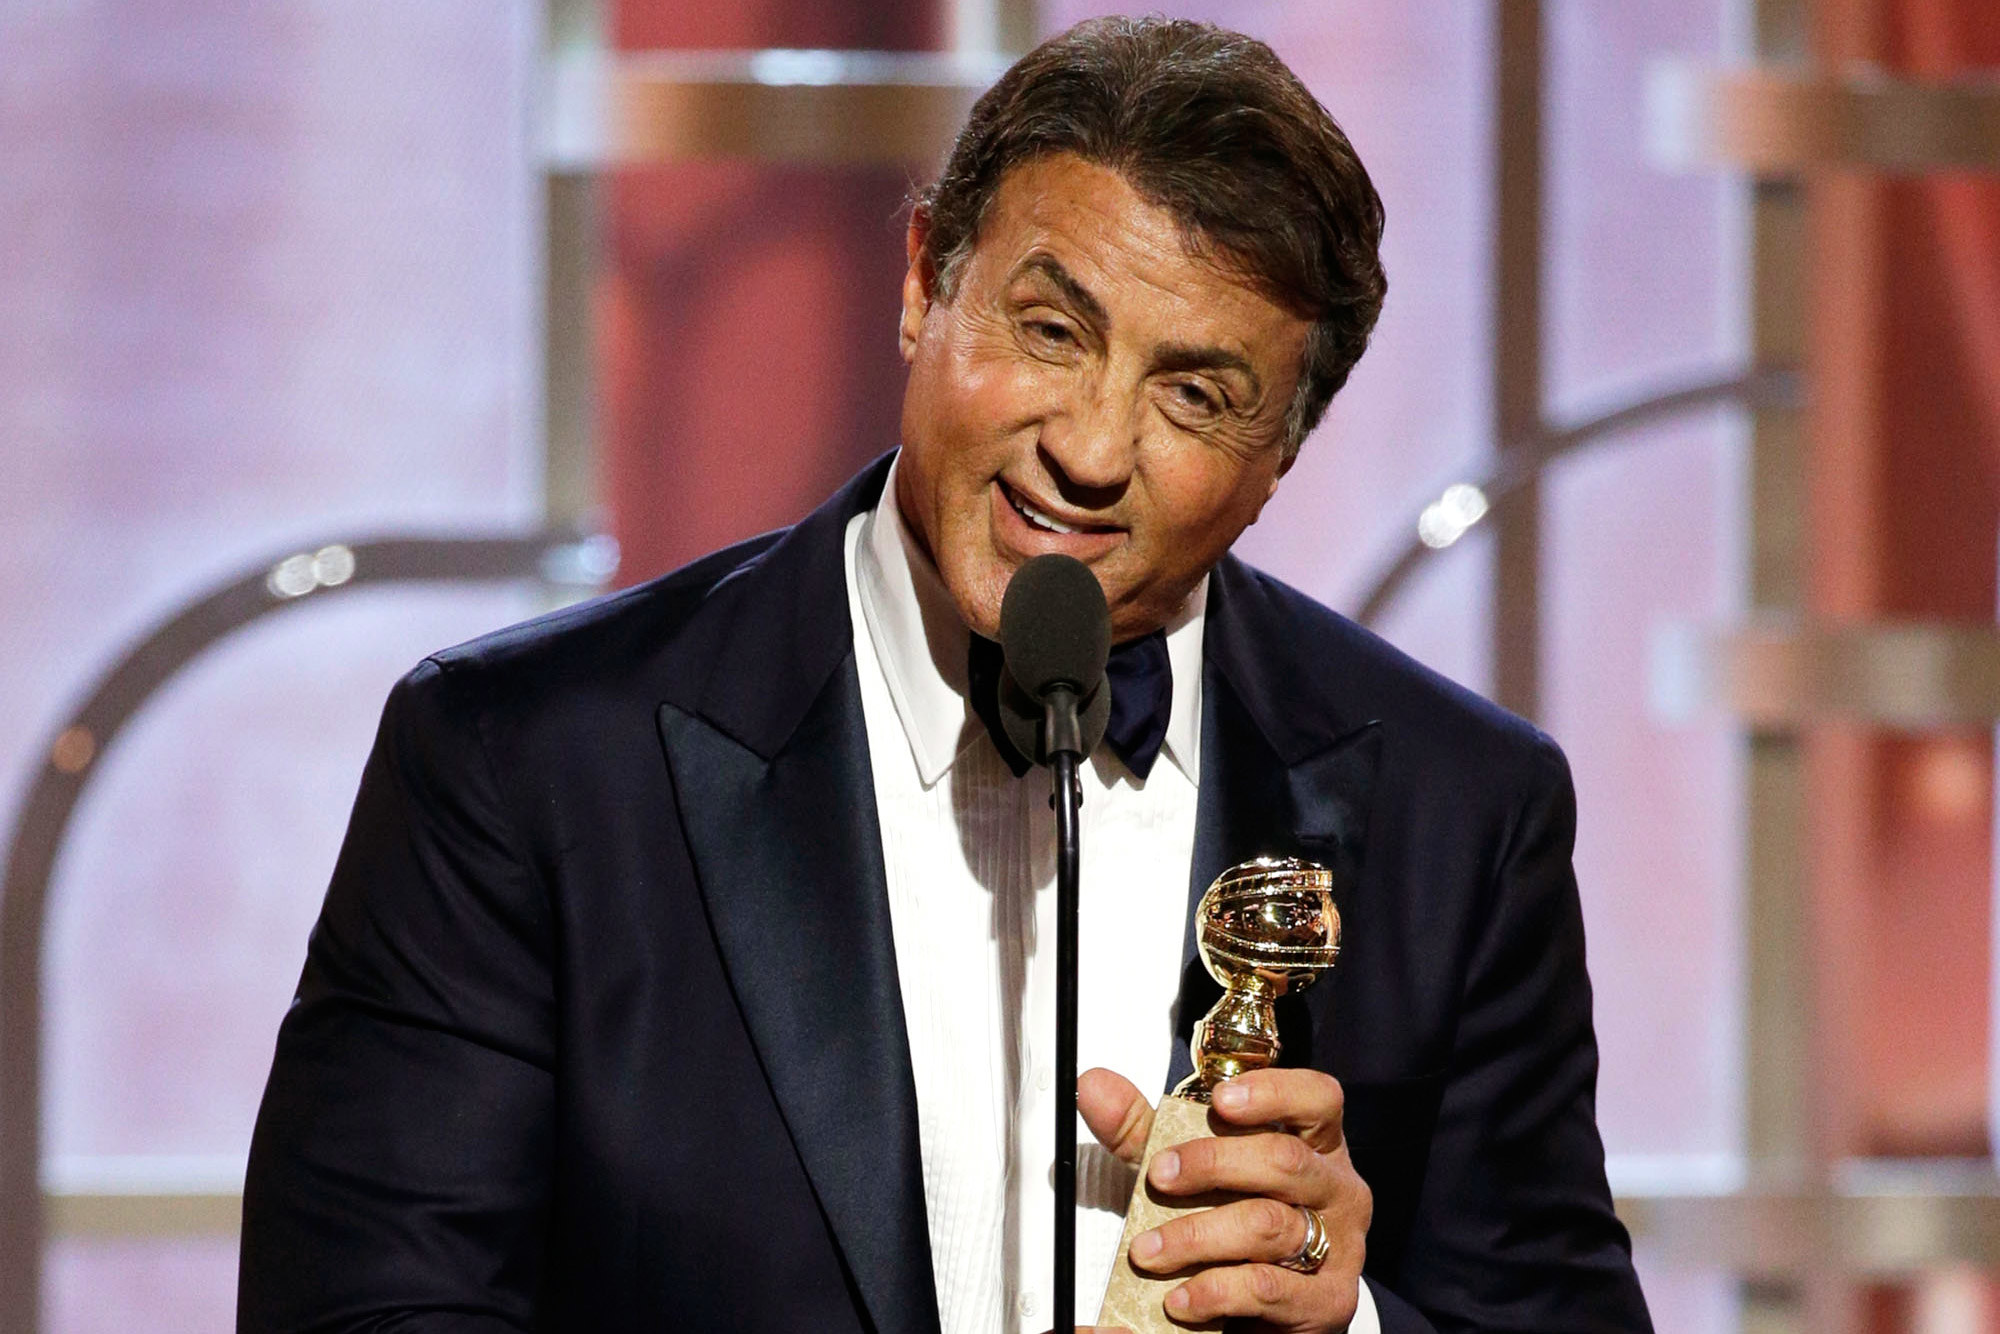 Sylvester Stallone receiving an award and making his speech on the stage